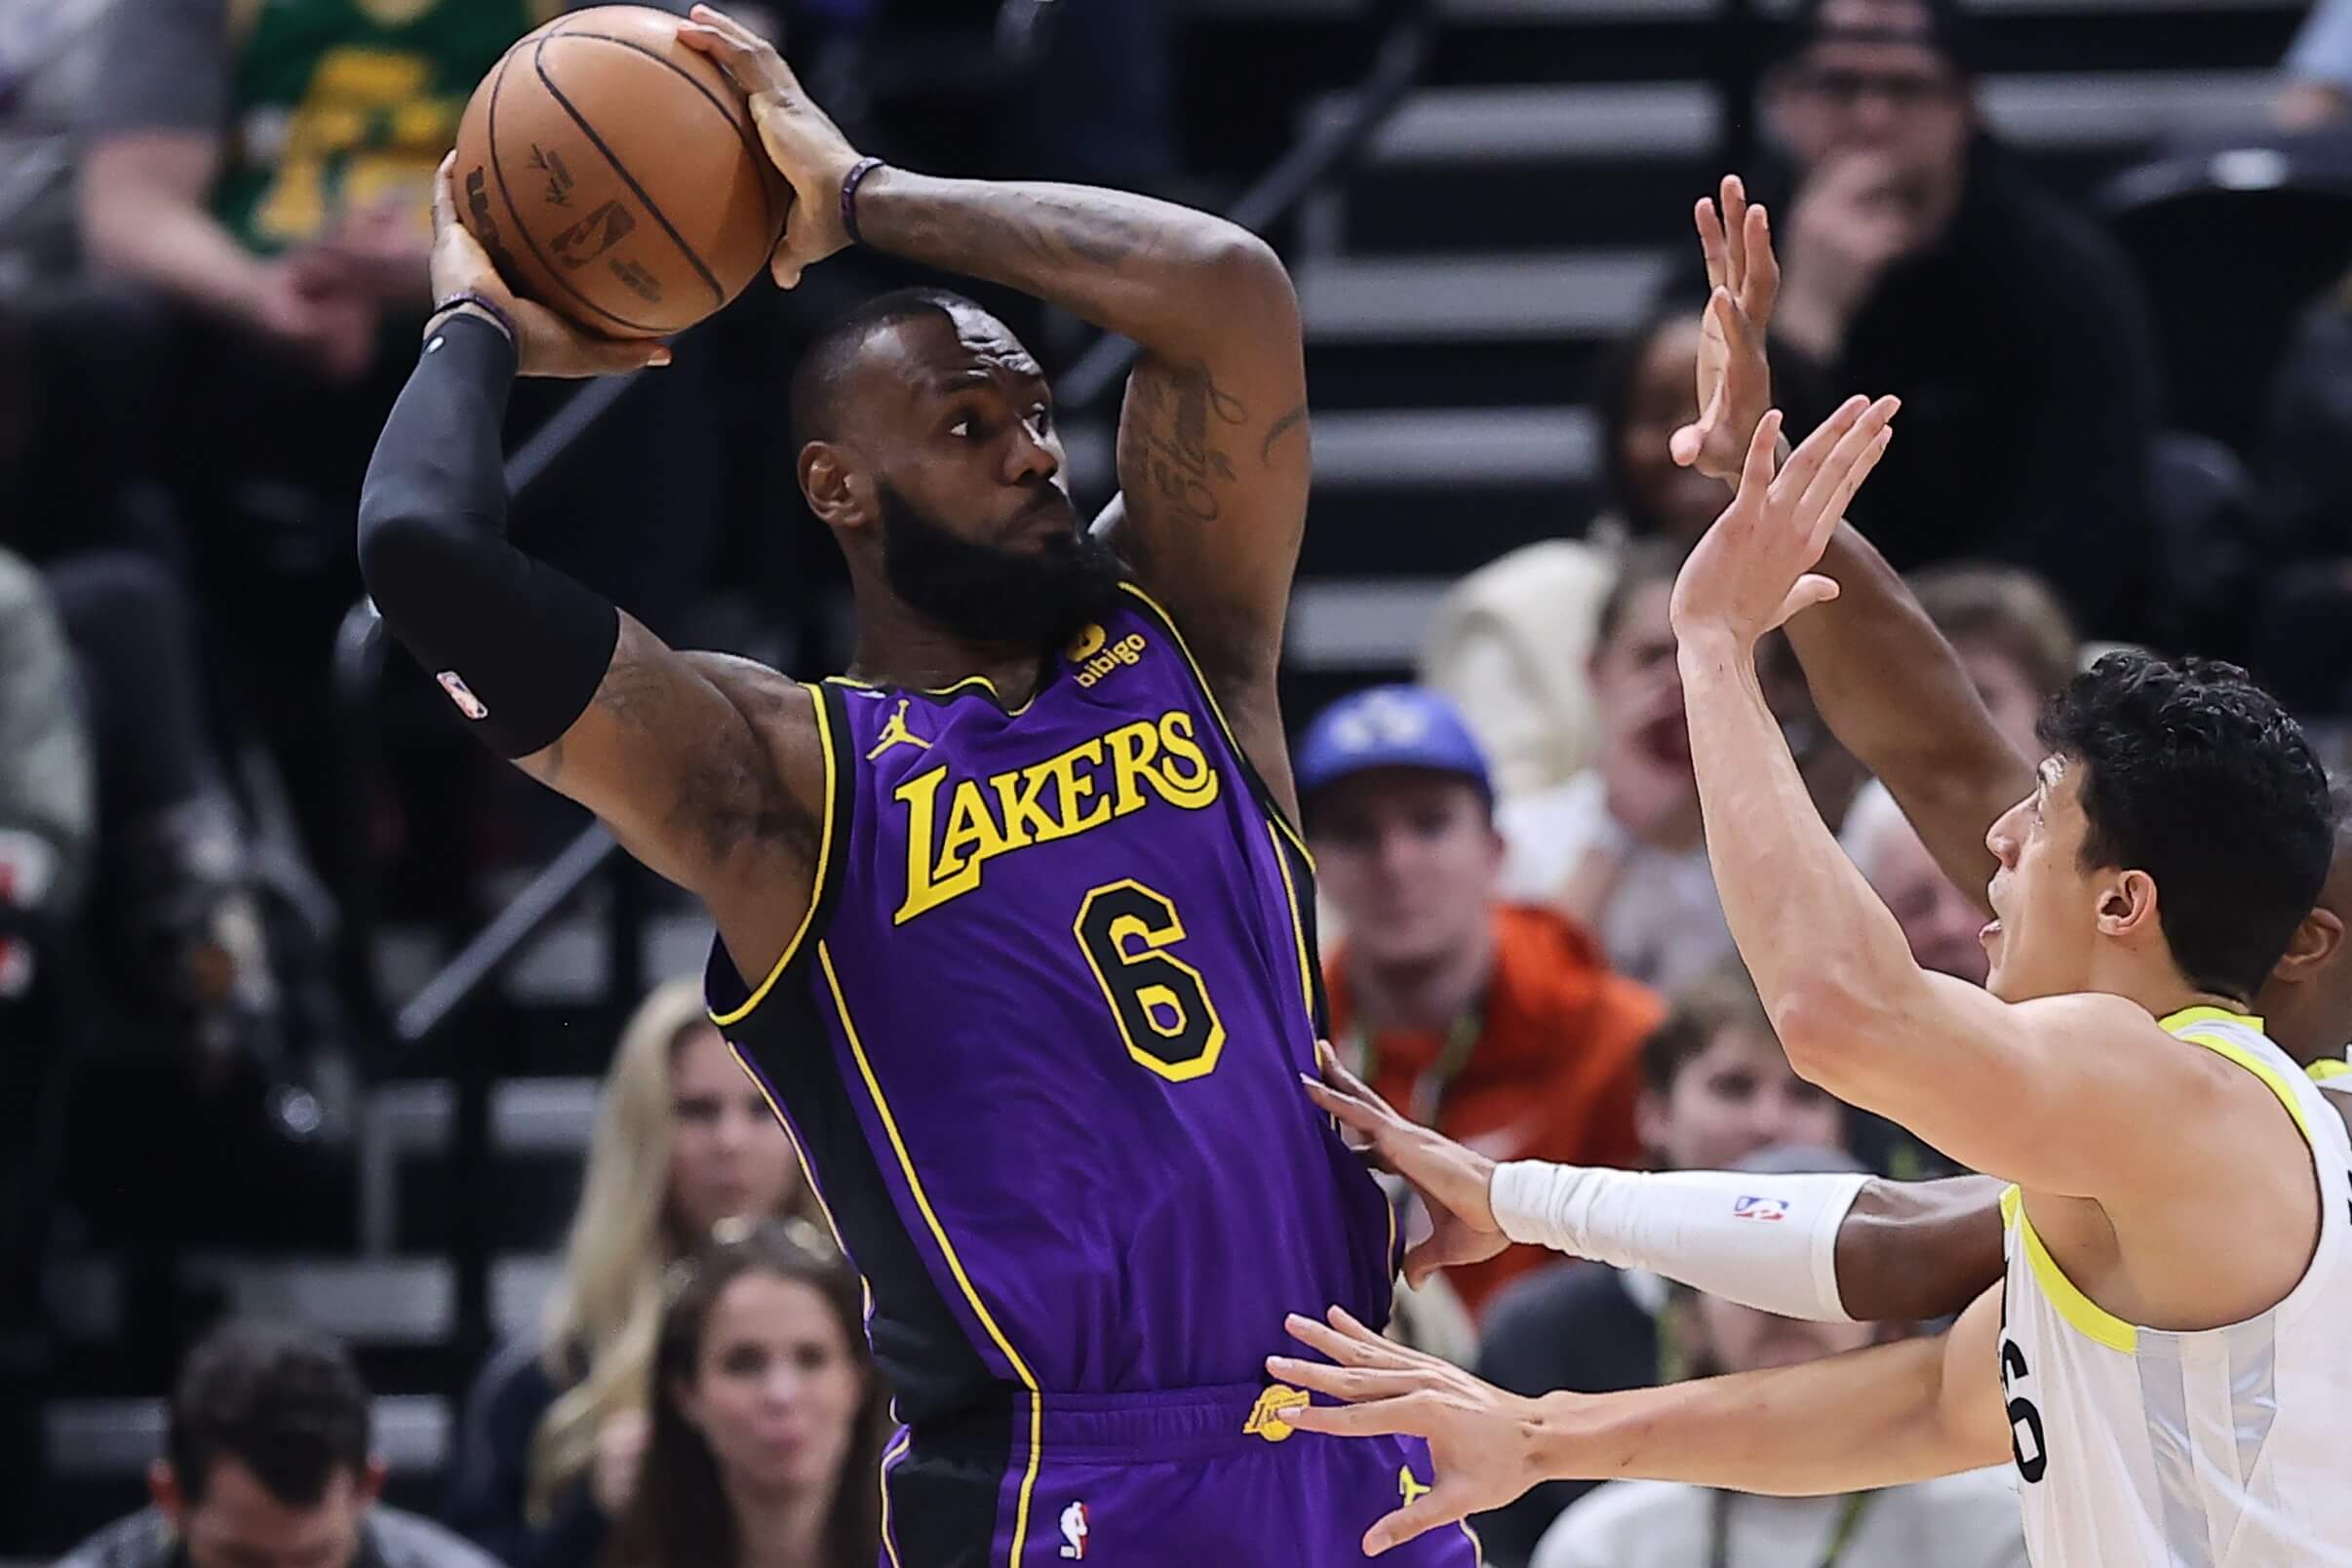 Lakers vs. Grizzlies prediction, odds, start time: 2023 NBA playoff picks,  Game 6 bets from model on 71-38 run 